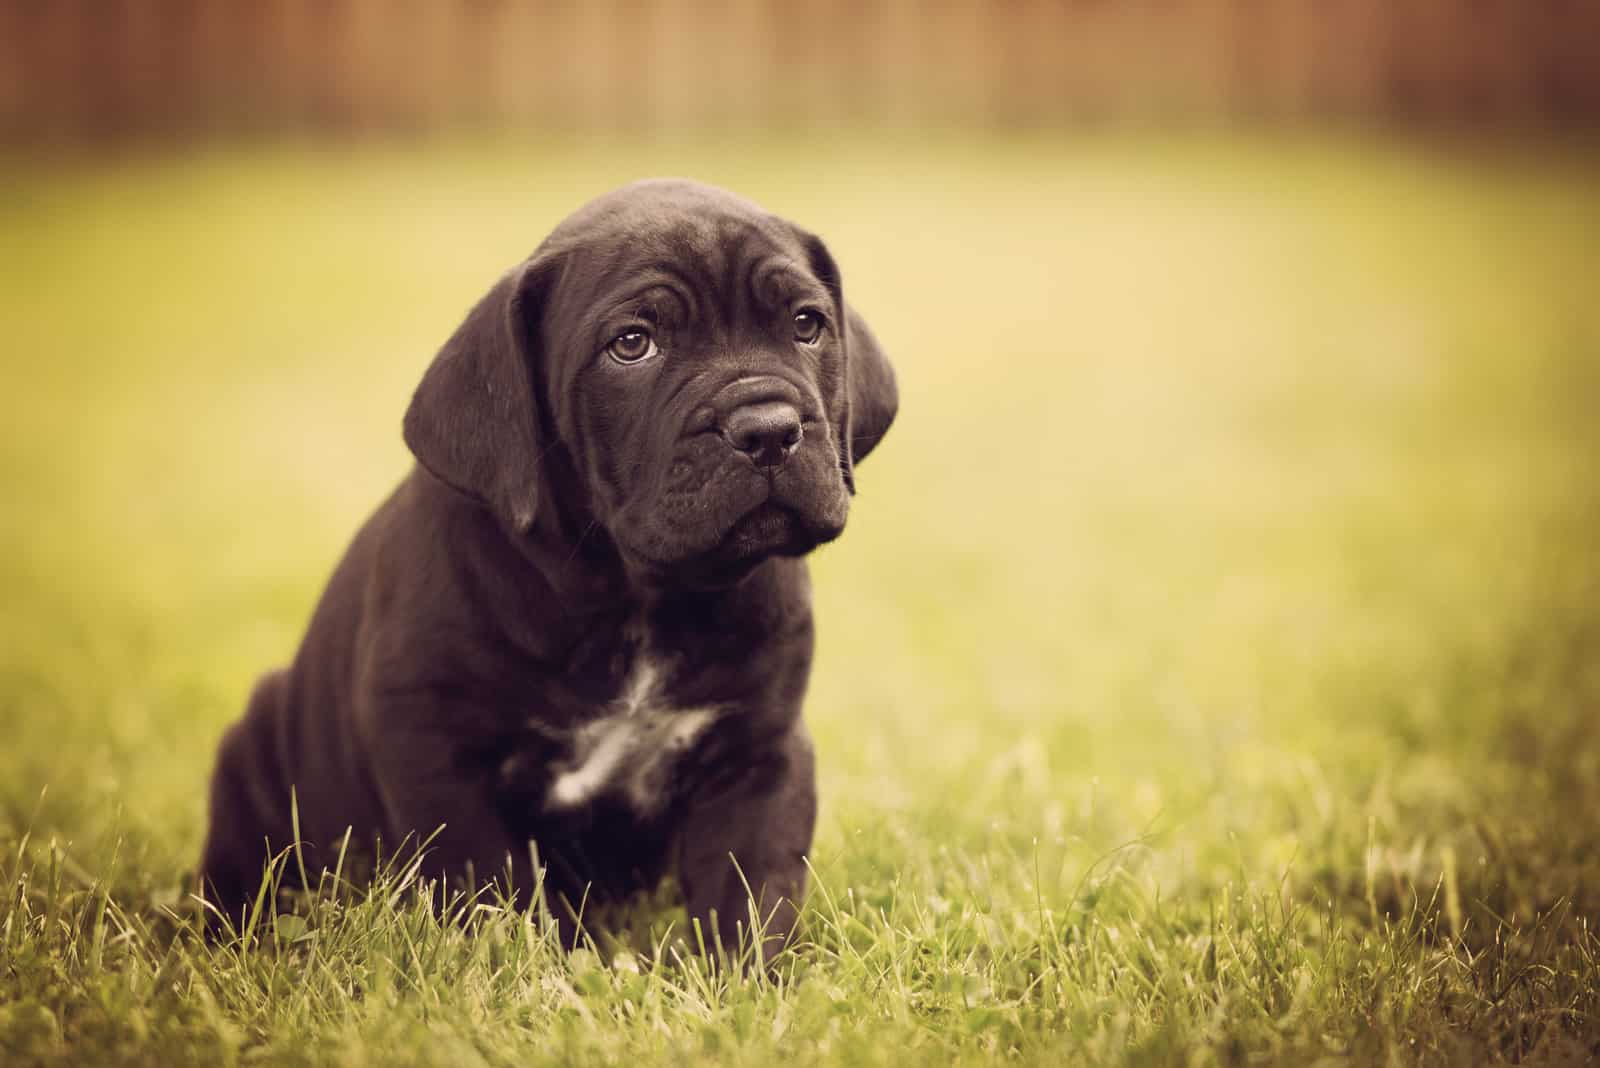 cane corso the puppy lies on the grass